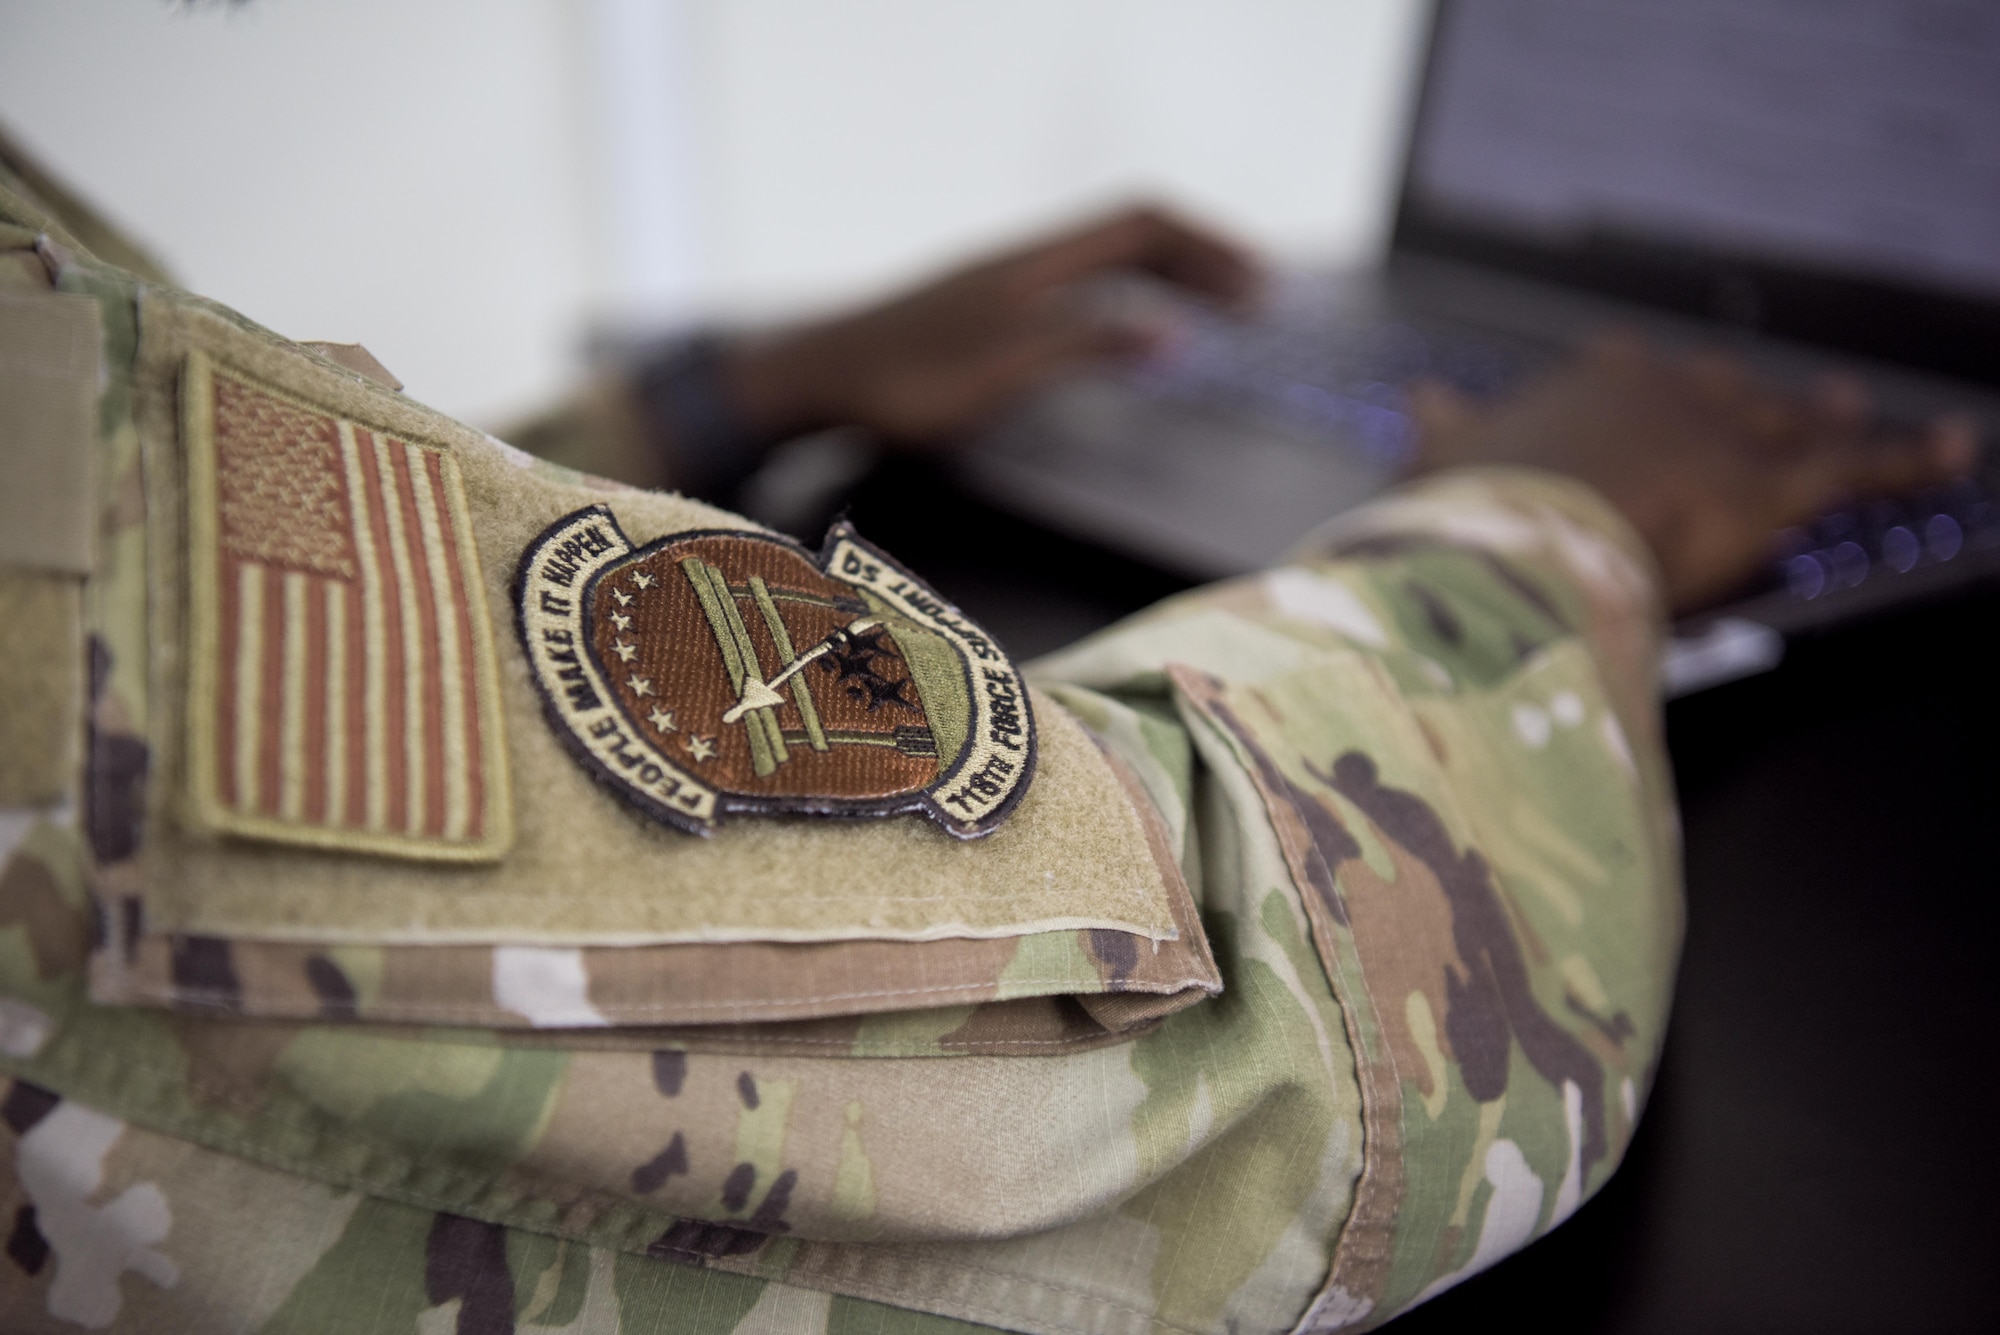 A 718th Force Support Squadron rests on the uniform sleeve of an Airman as he types on a laptop.